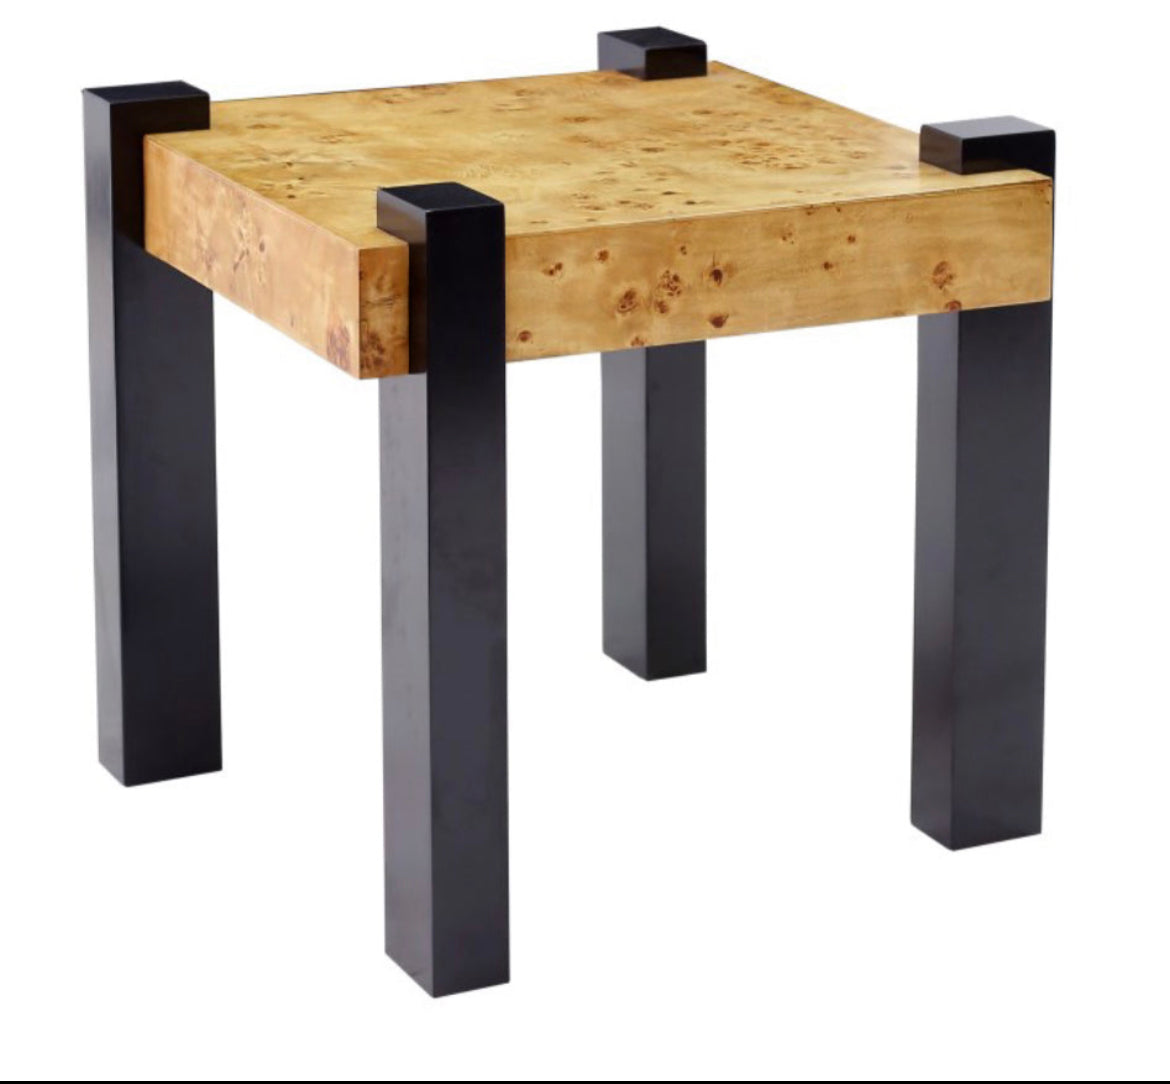 The Bromo End Table